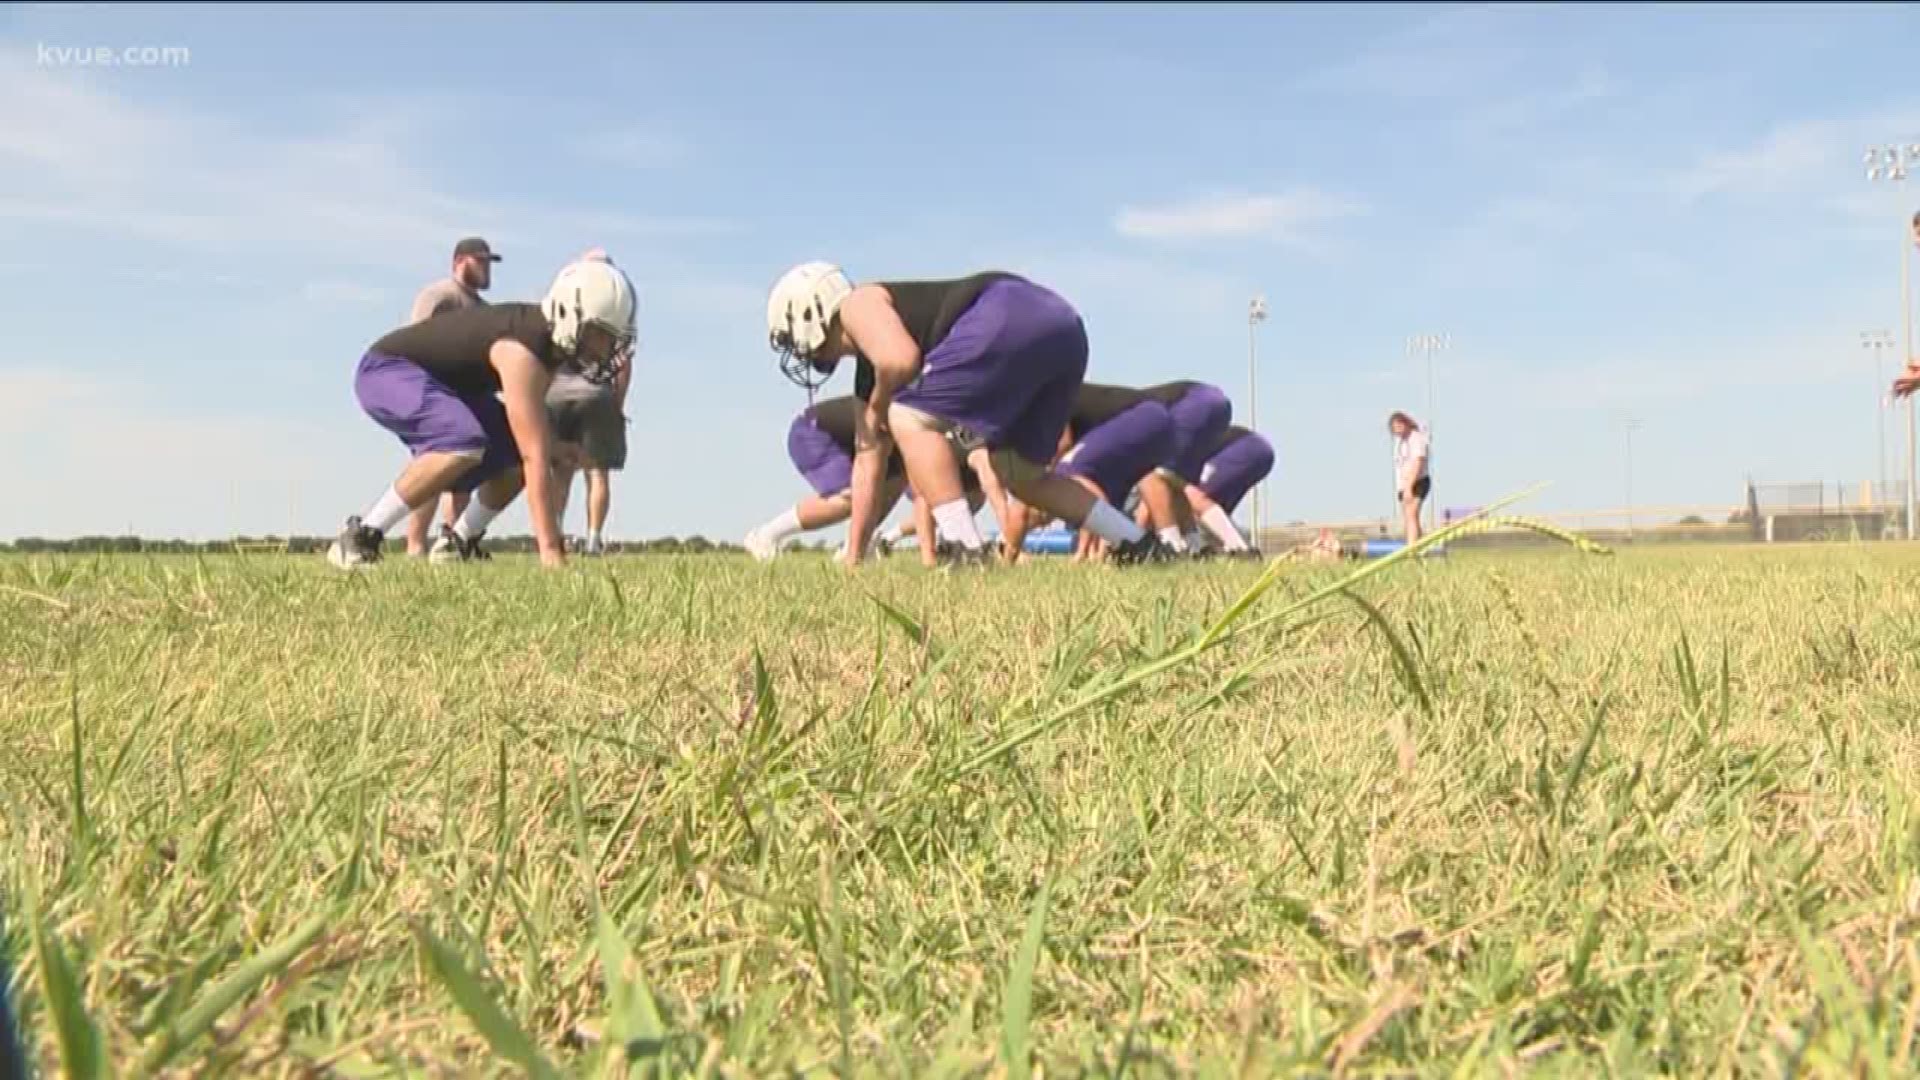 The high school football season is right around the corner, and the start of fall camp is an exciting time.